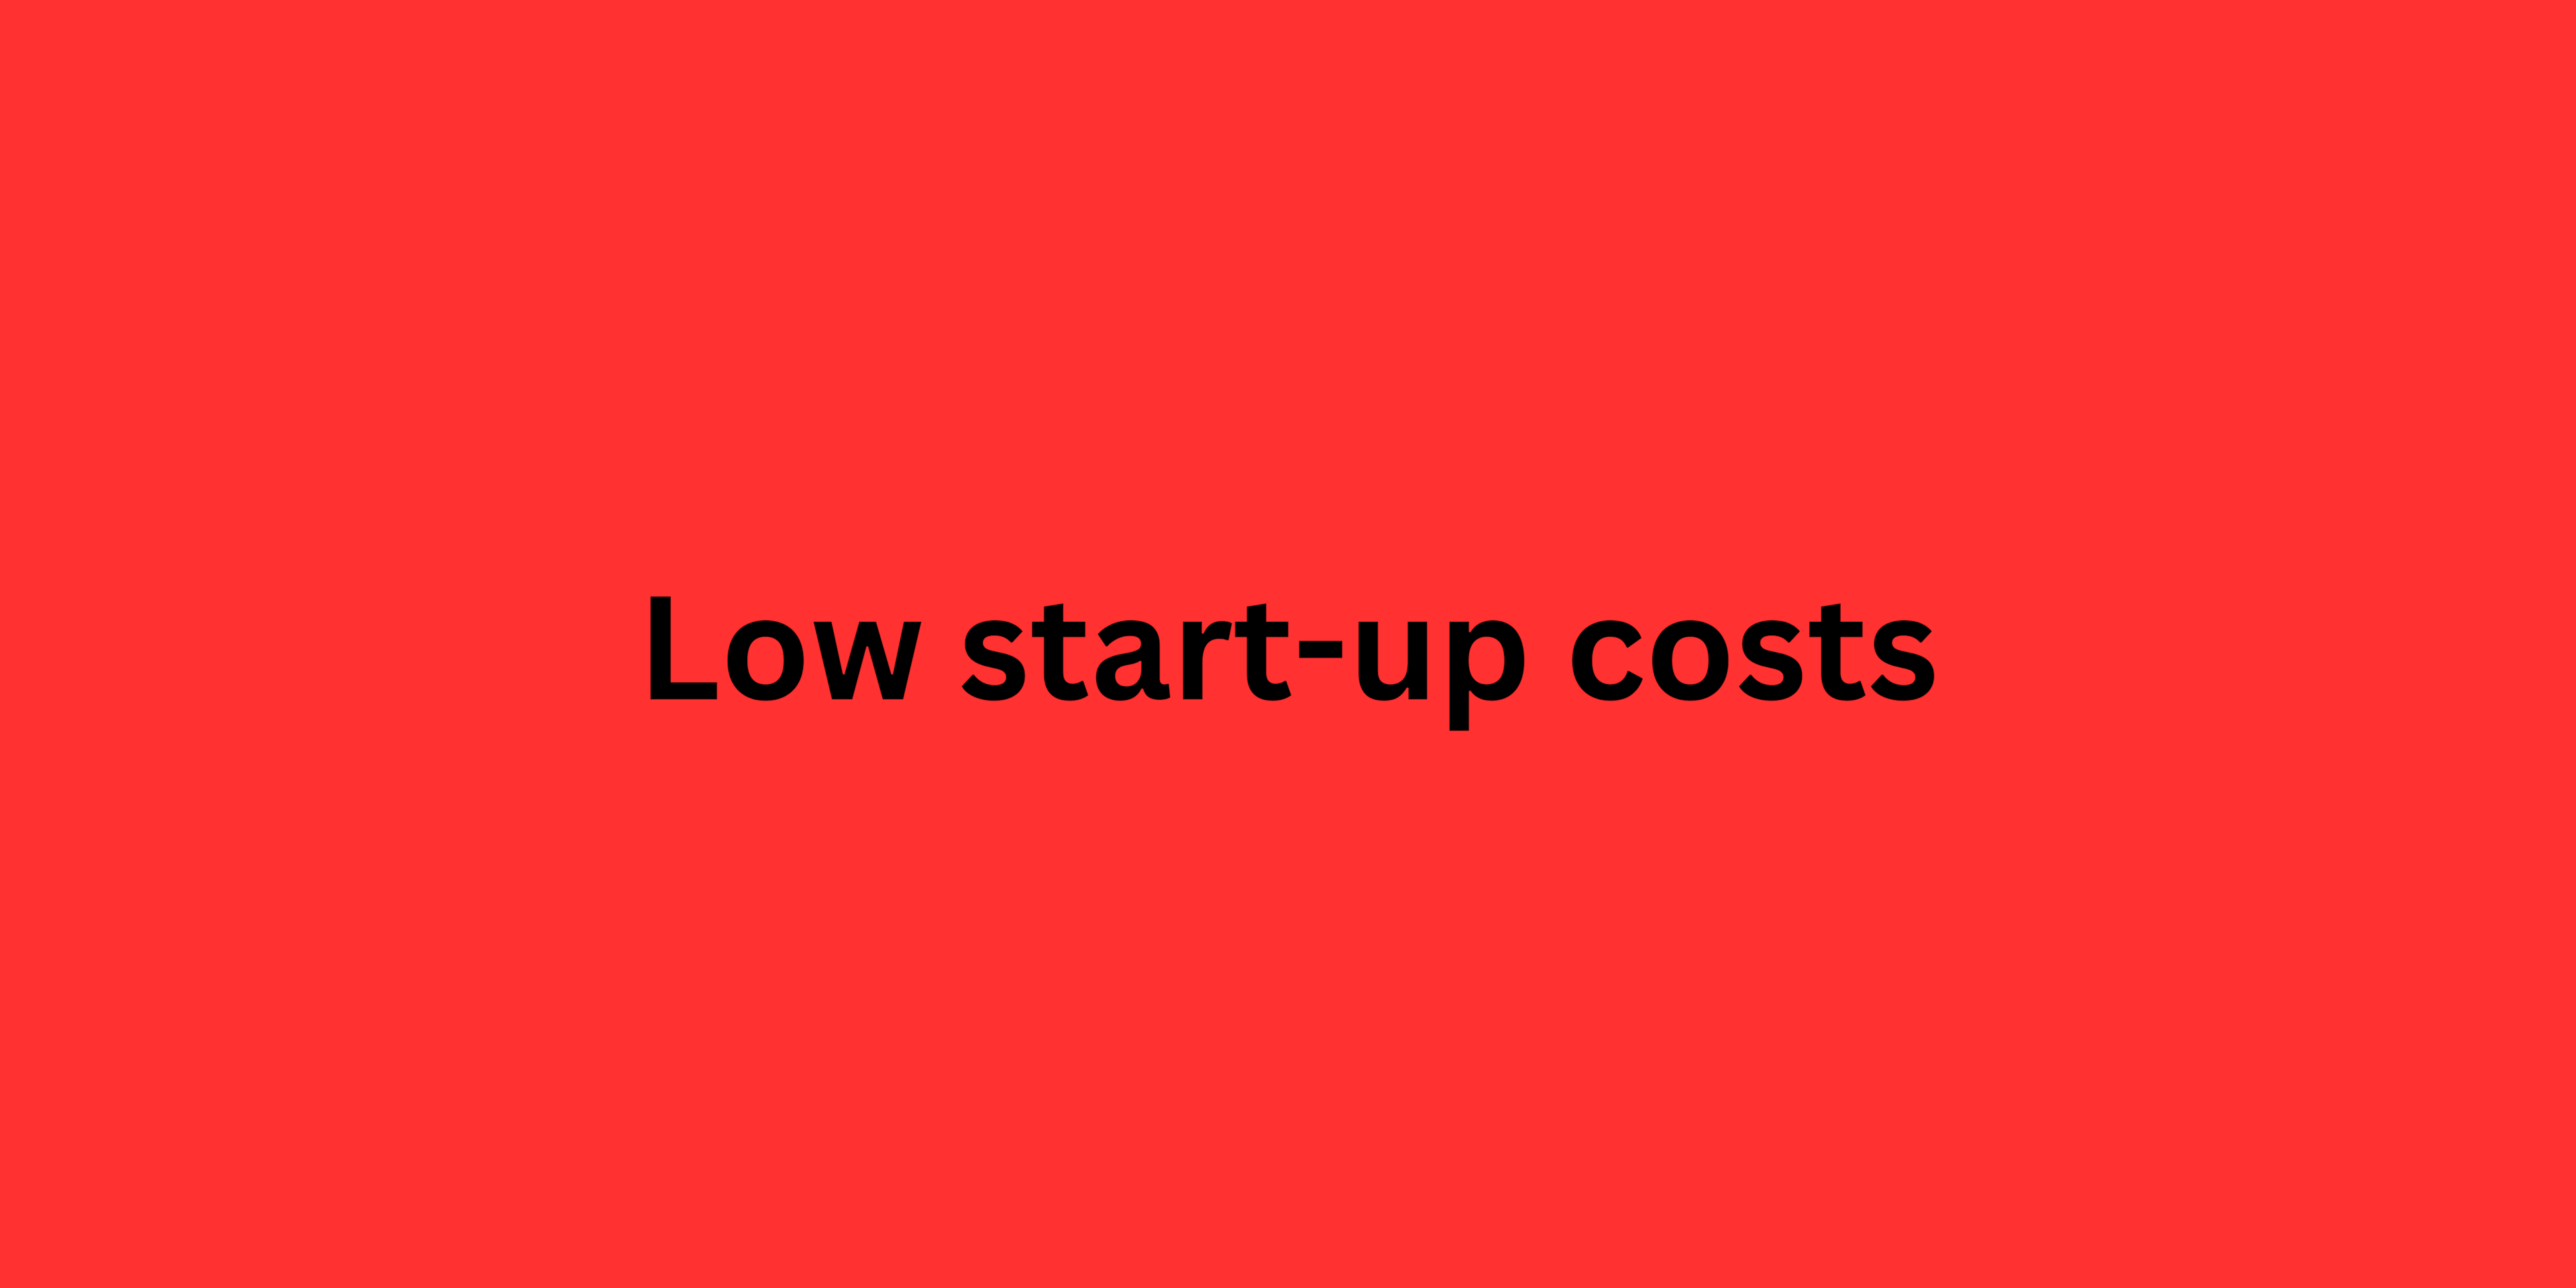 Low start-up costs